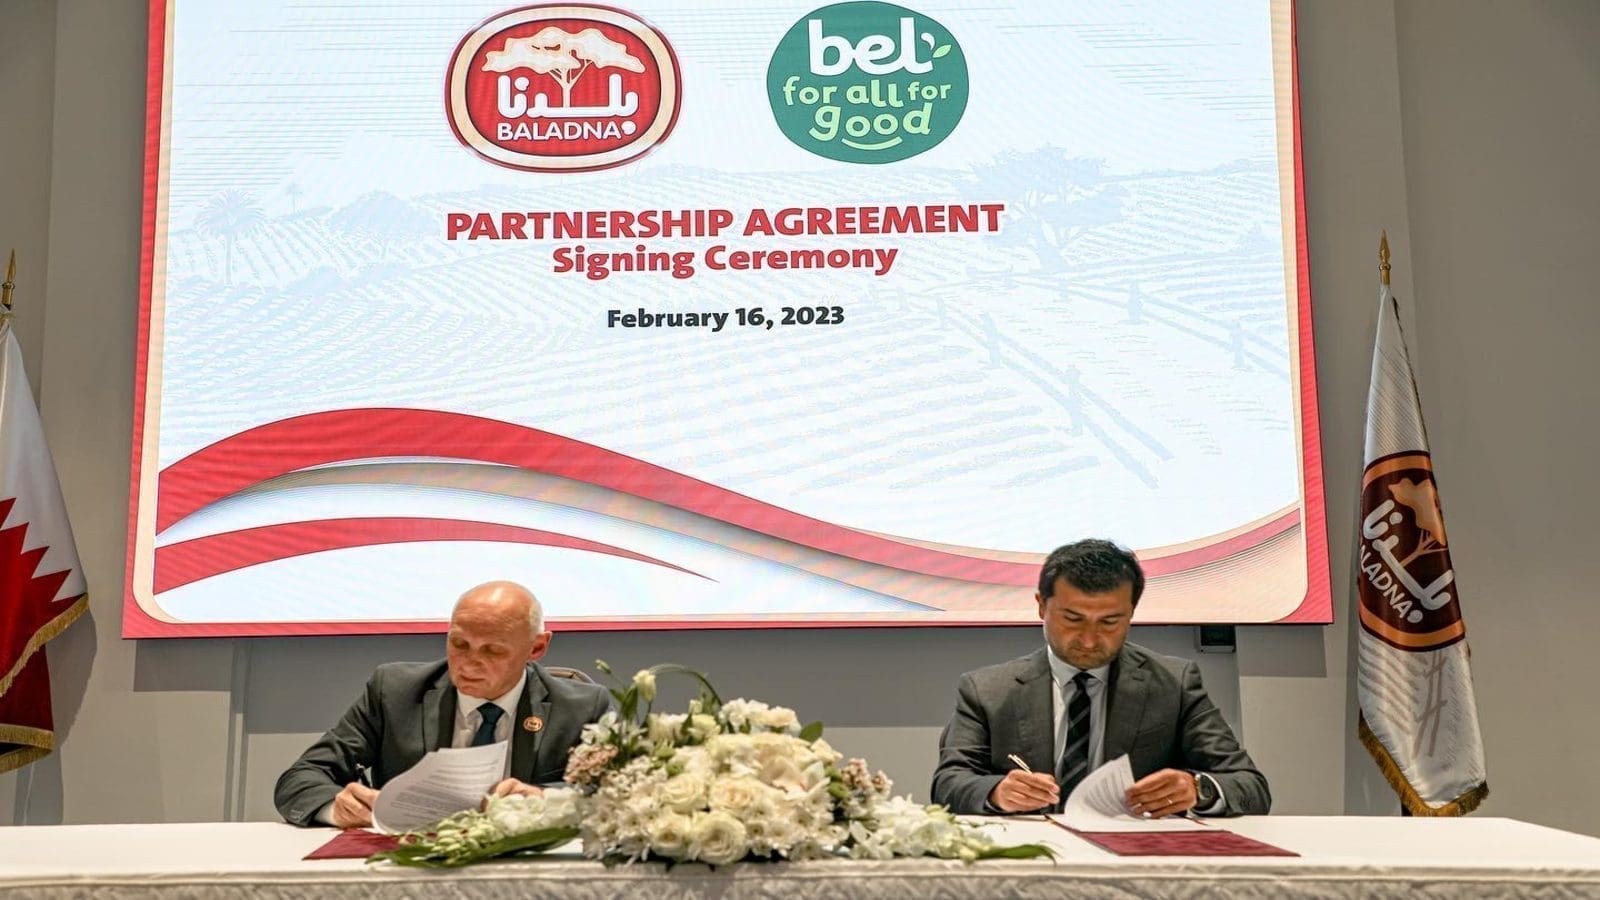 Baladna inks deal with Bel Group to expand dairy offerings in Qatar